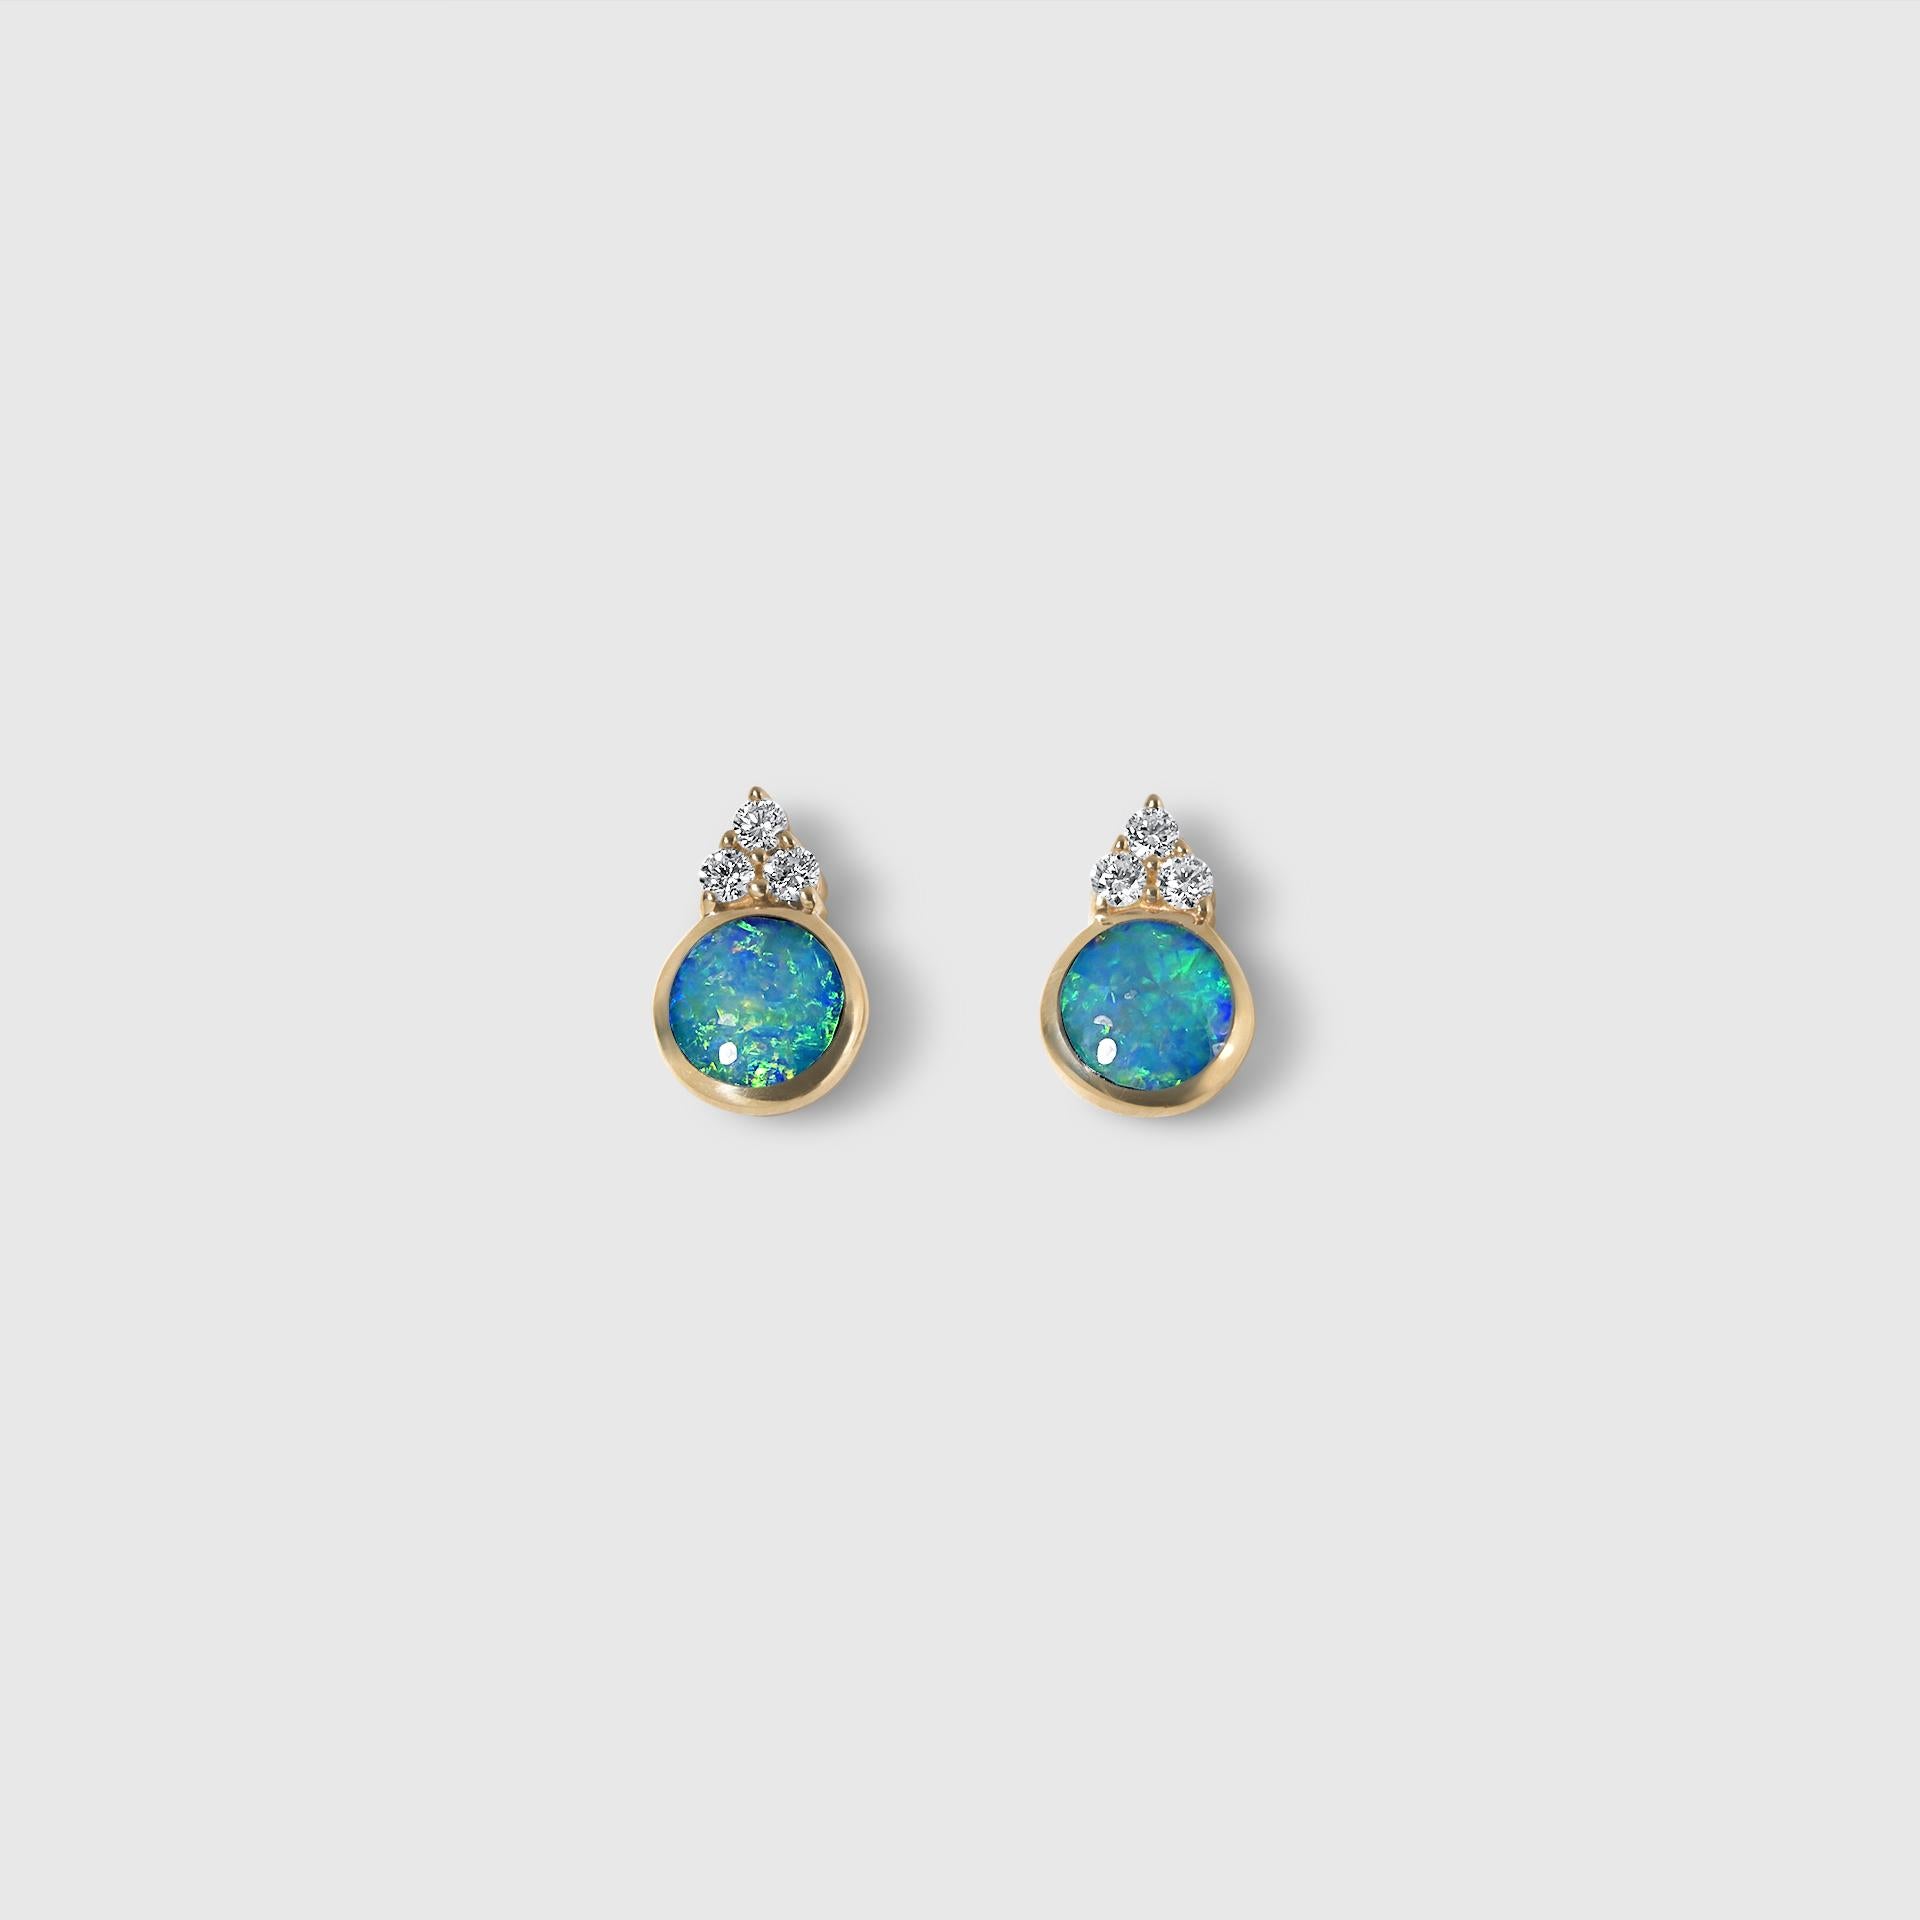 High Grade Opal and Diamond Miniature Post Earrings with Diamonds

All designs may be custom-ordered in many of Kabana’s stones, including: sleeping beauty turquoise, turquoise, four-star opal, five-star-high-grade opal, black onyx, red or orange